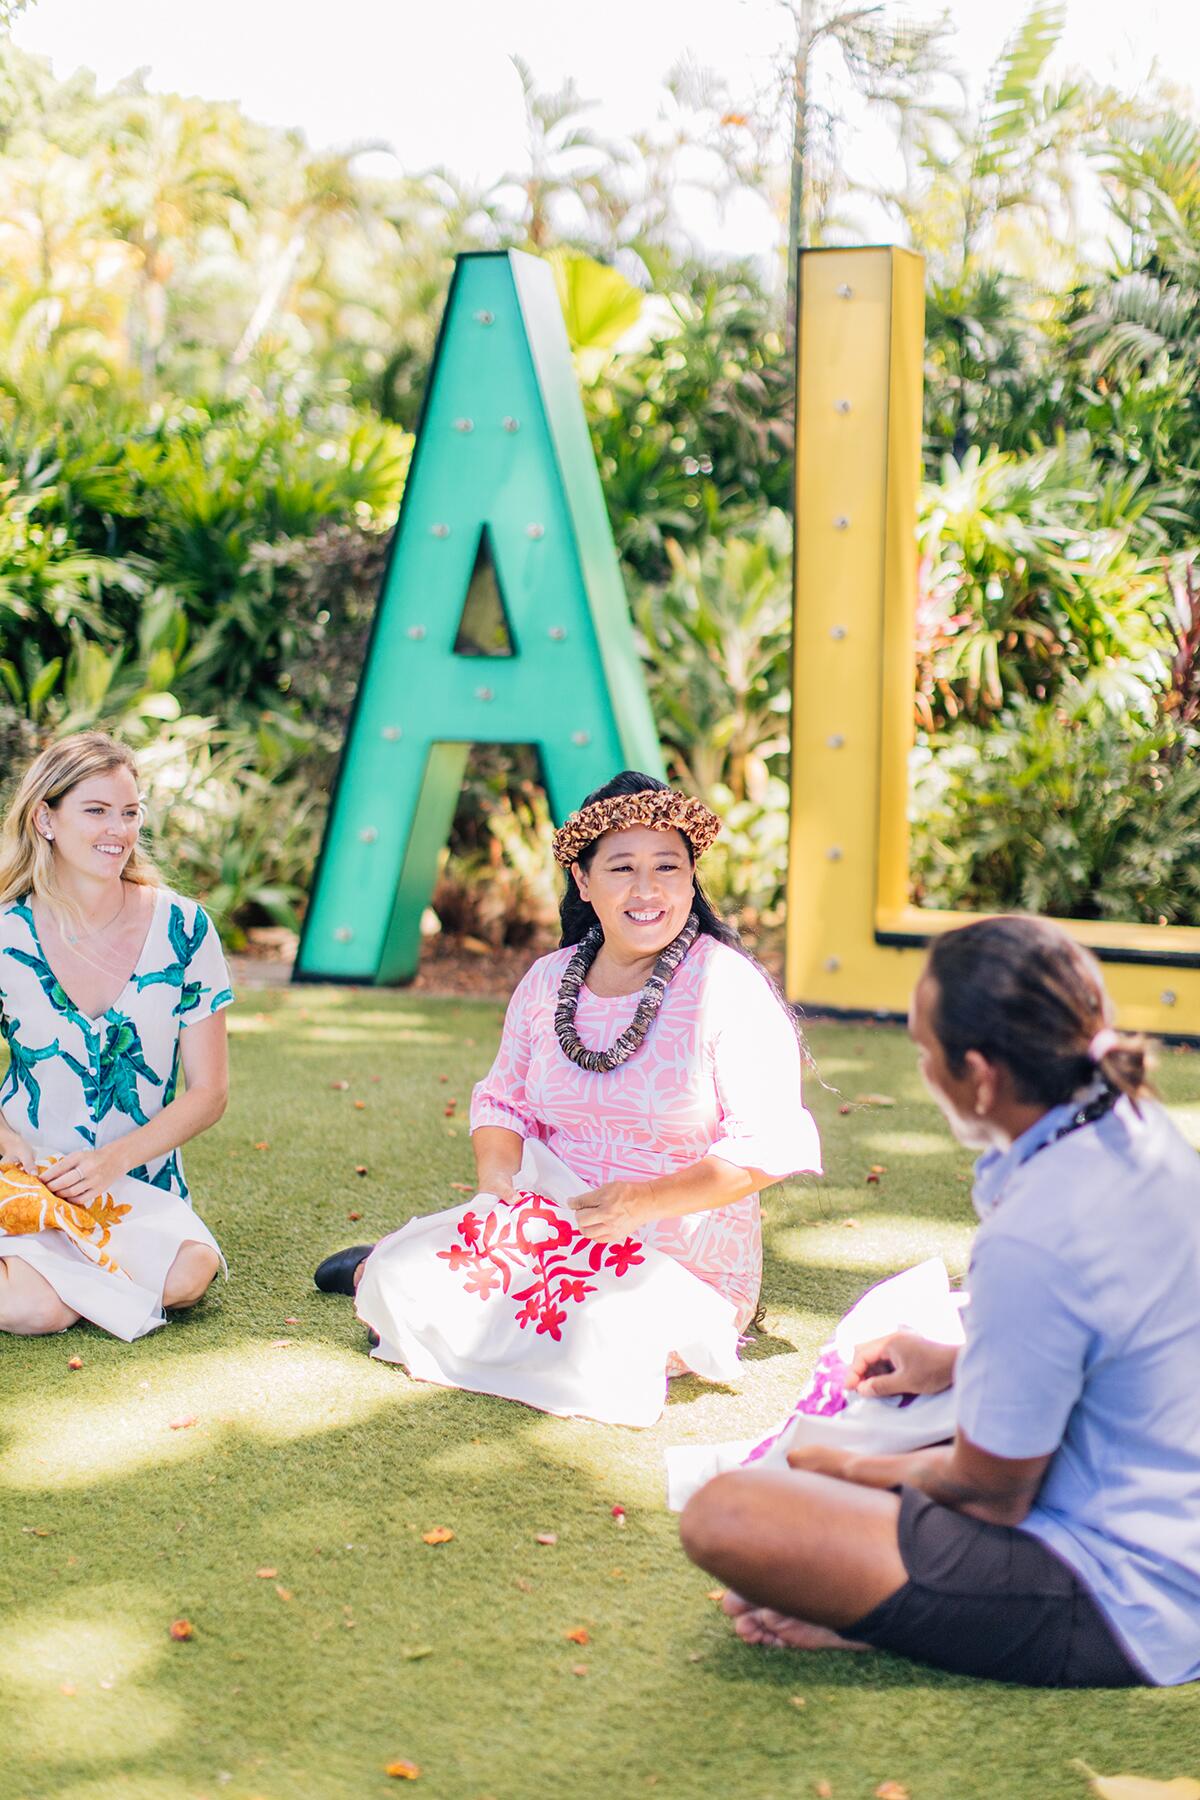 <a href='https://www.fodors.com/world/north-america/usa/hawaii/experiences/news/photos/these-hawaii-hotels-give-back-to-the-local-community-in-a-big-way#'>From &quot;12 Hawaiian Hotels That Give Back to the Local Community: Wailea Beach Resort&quot;</a>